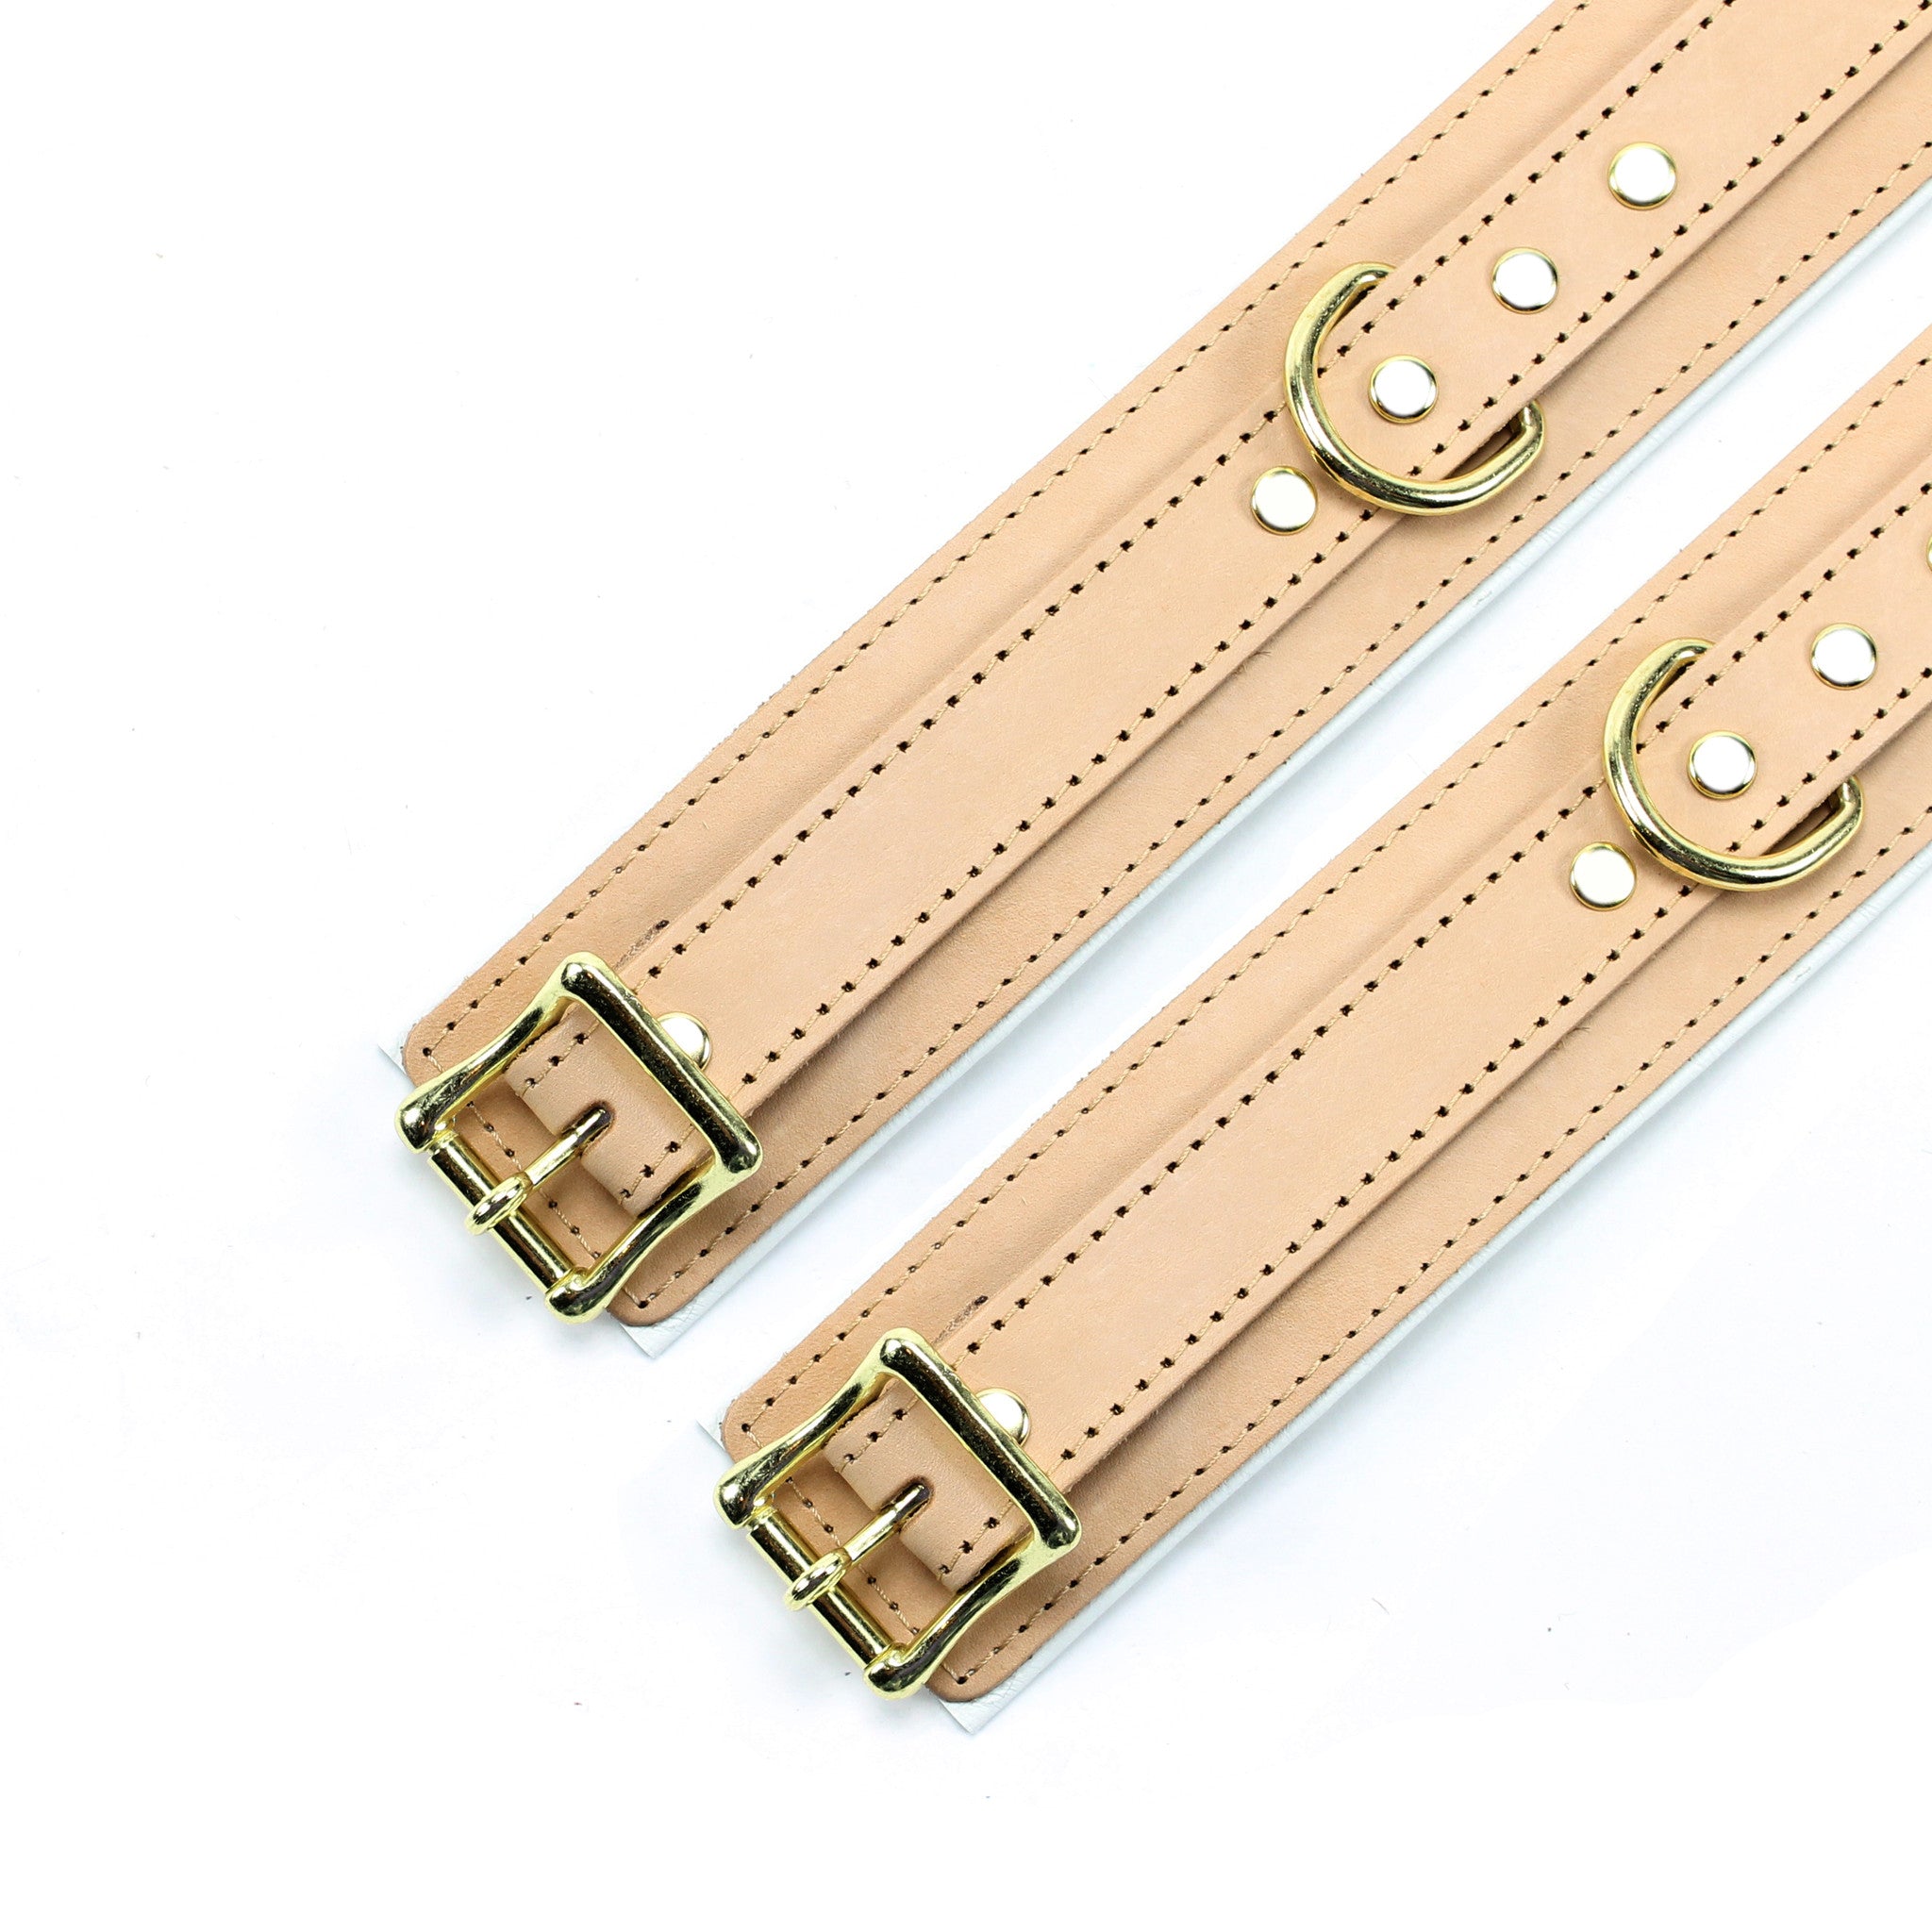 Luxury nude leather medical play bondage cuffs details